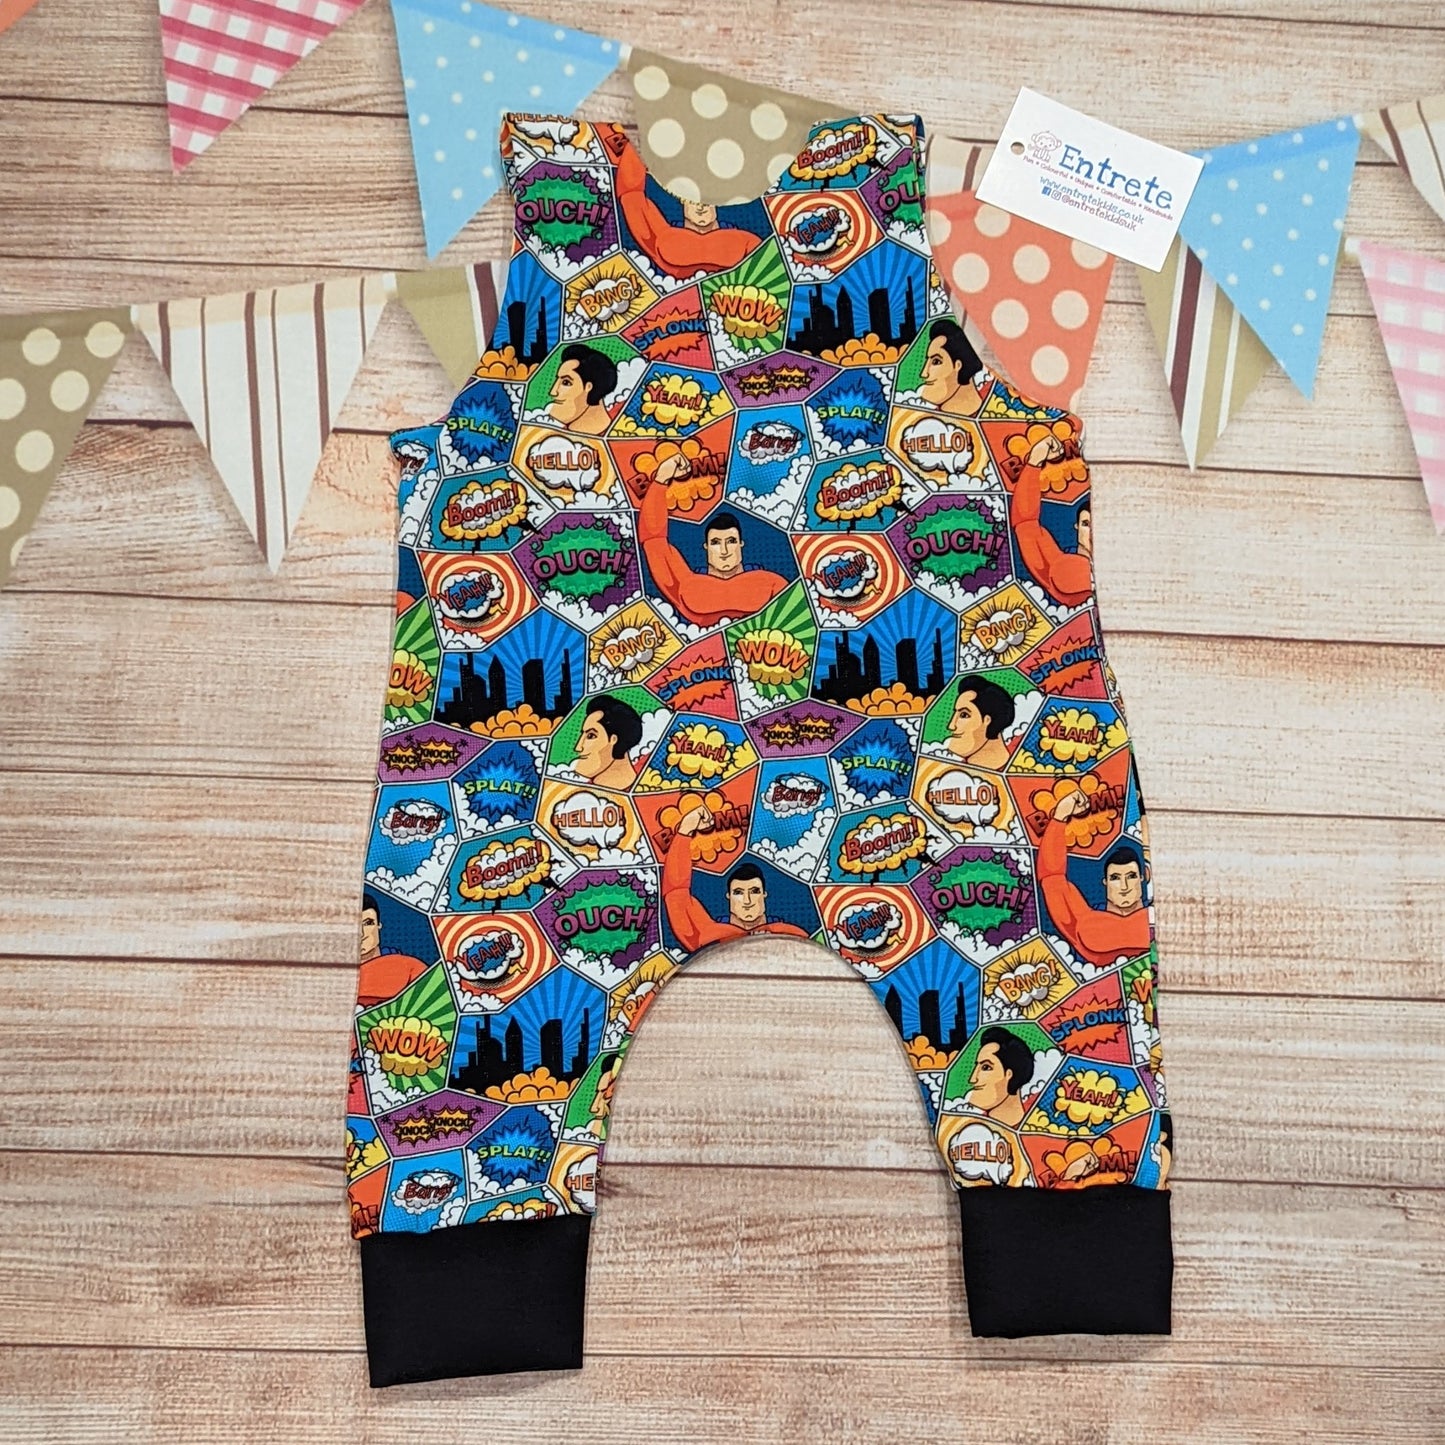 The awesome superhero sleeveless romper with it's comic strip print. Handmade using superhero and black cotton jerseys'. Shown from the rear.